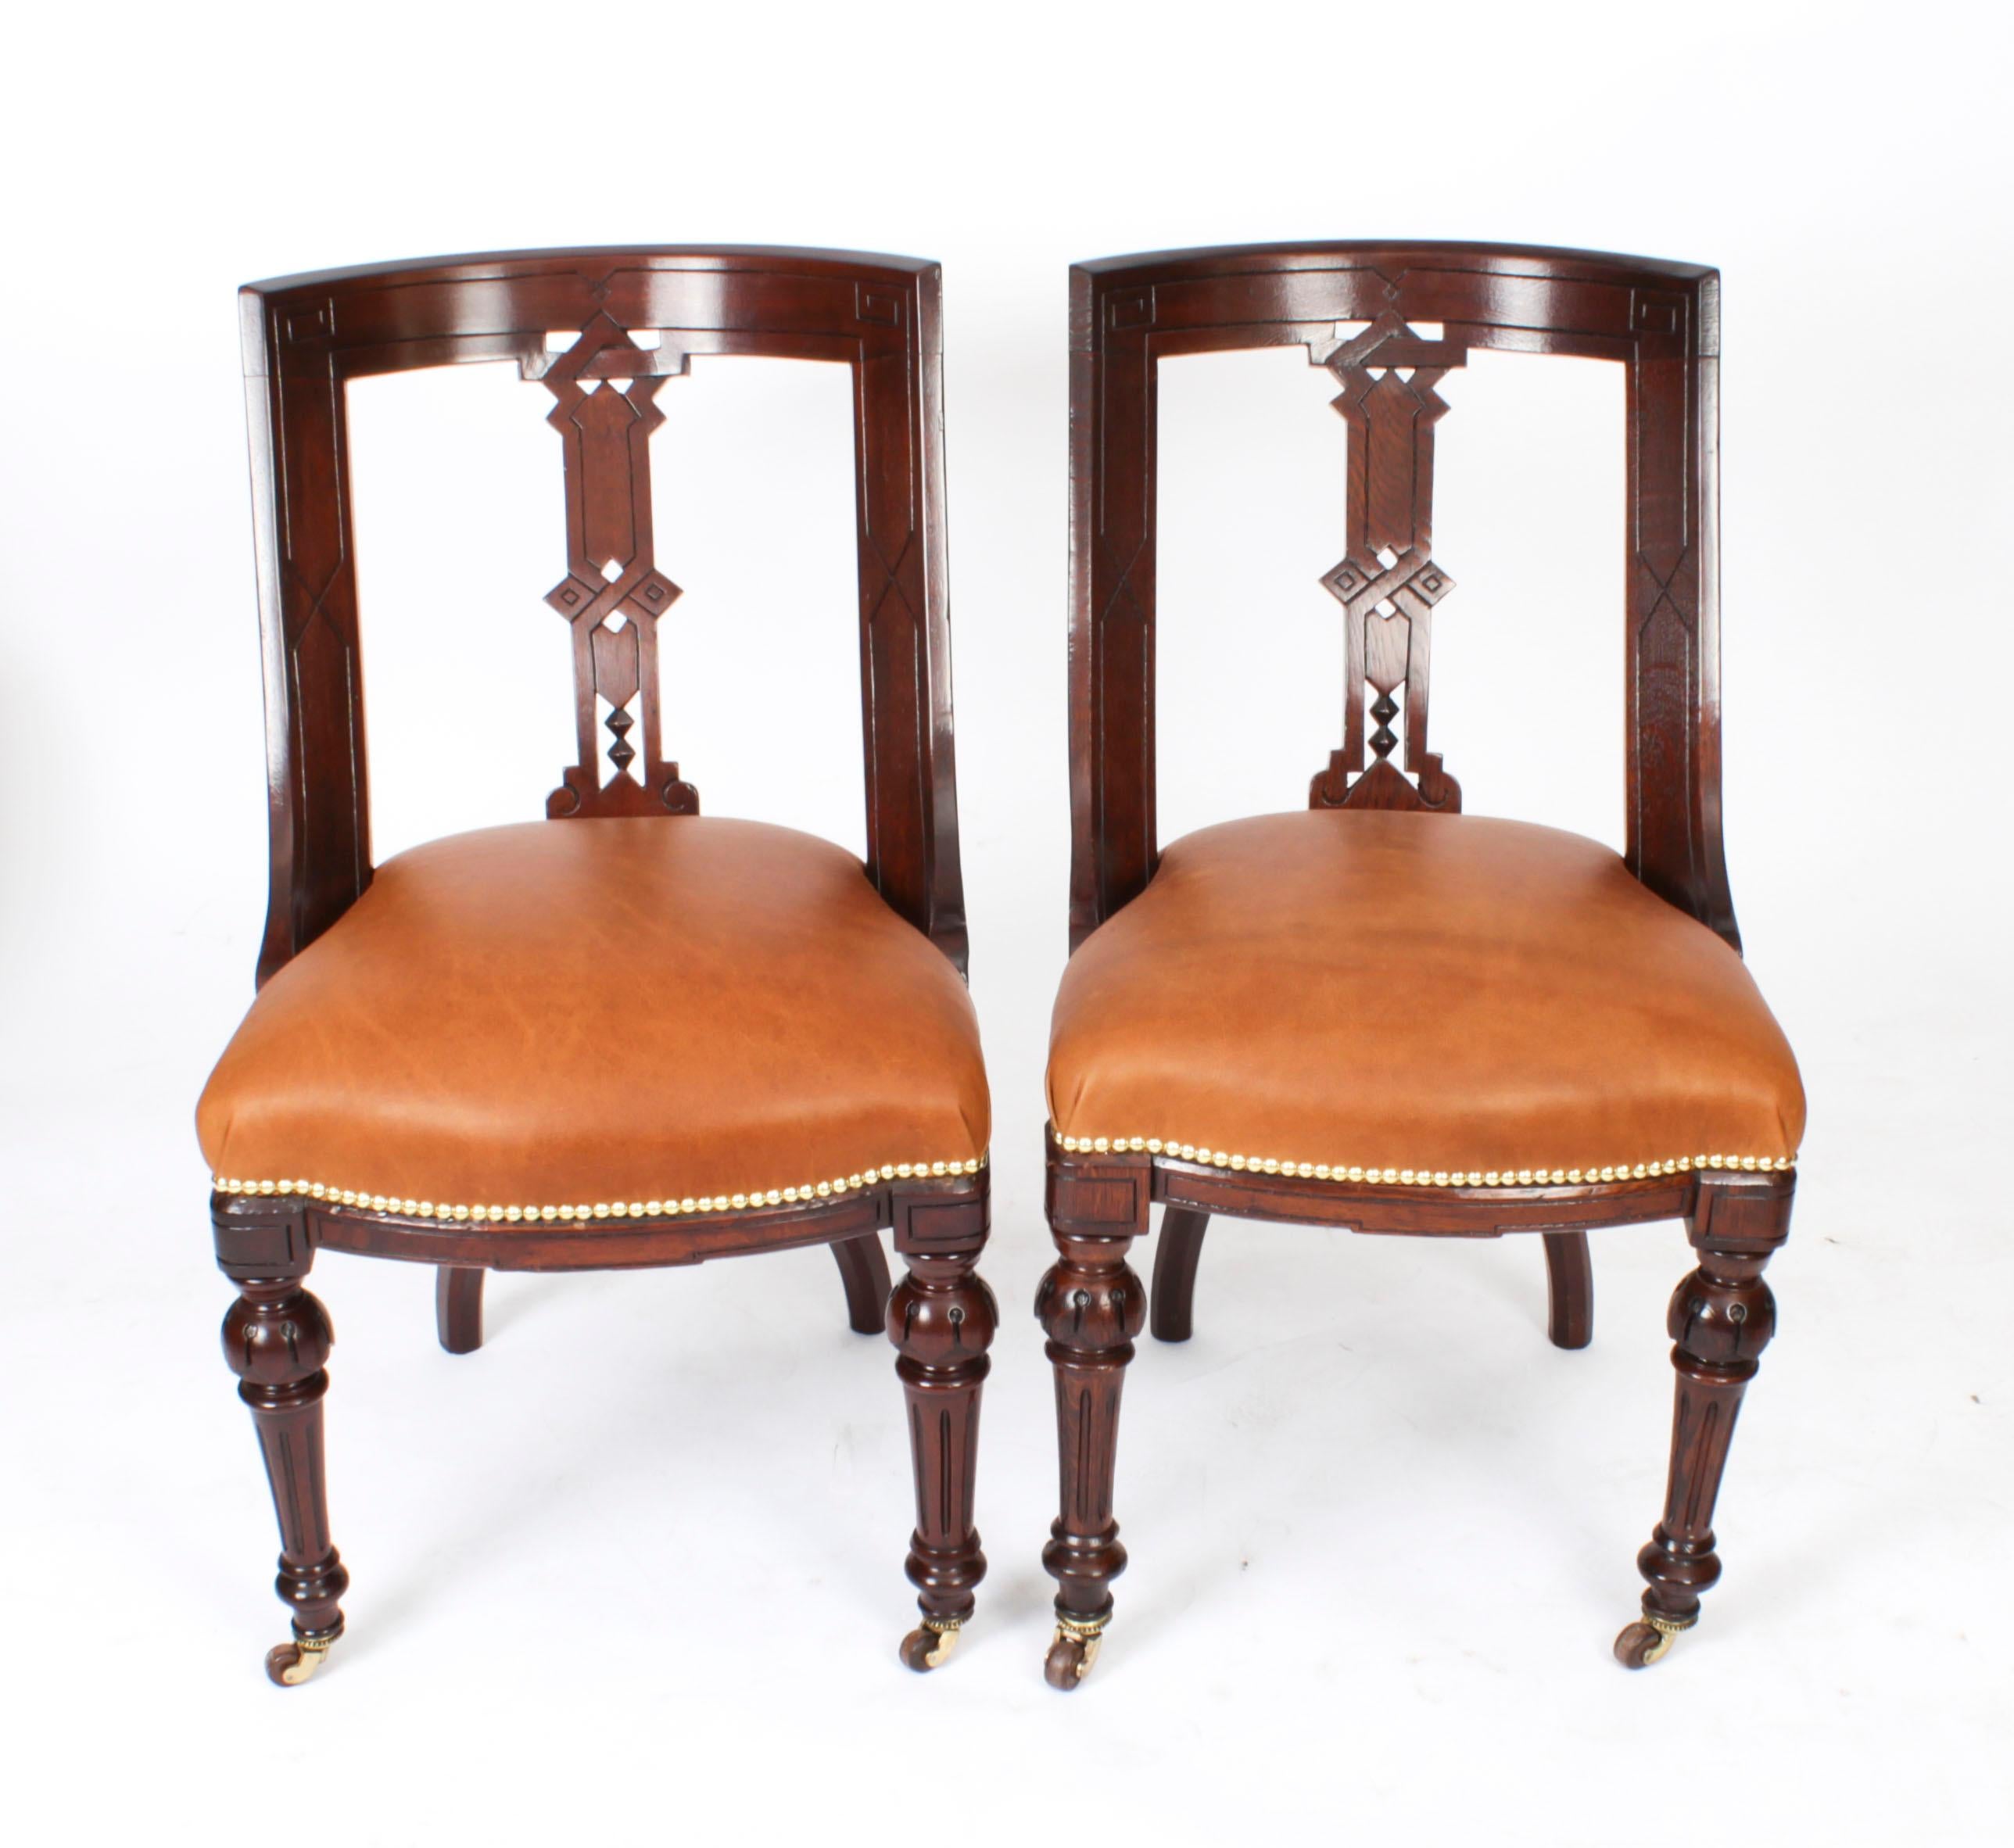 This is a lovely set of fourteen antique Victorian solid mahogany 